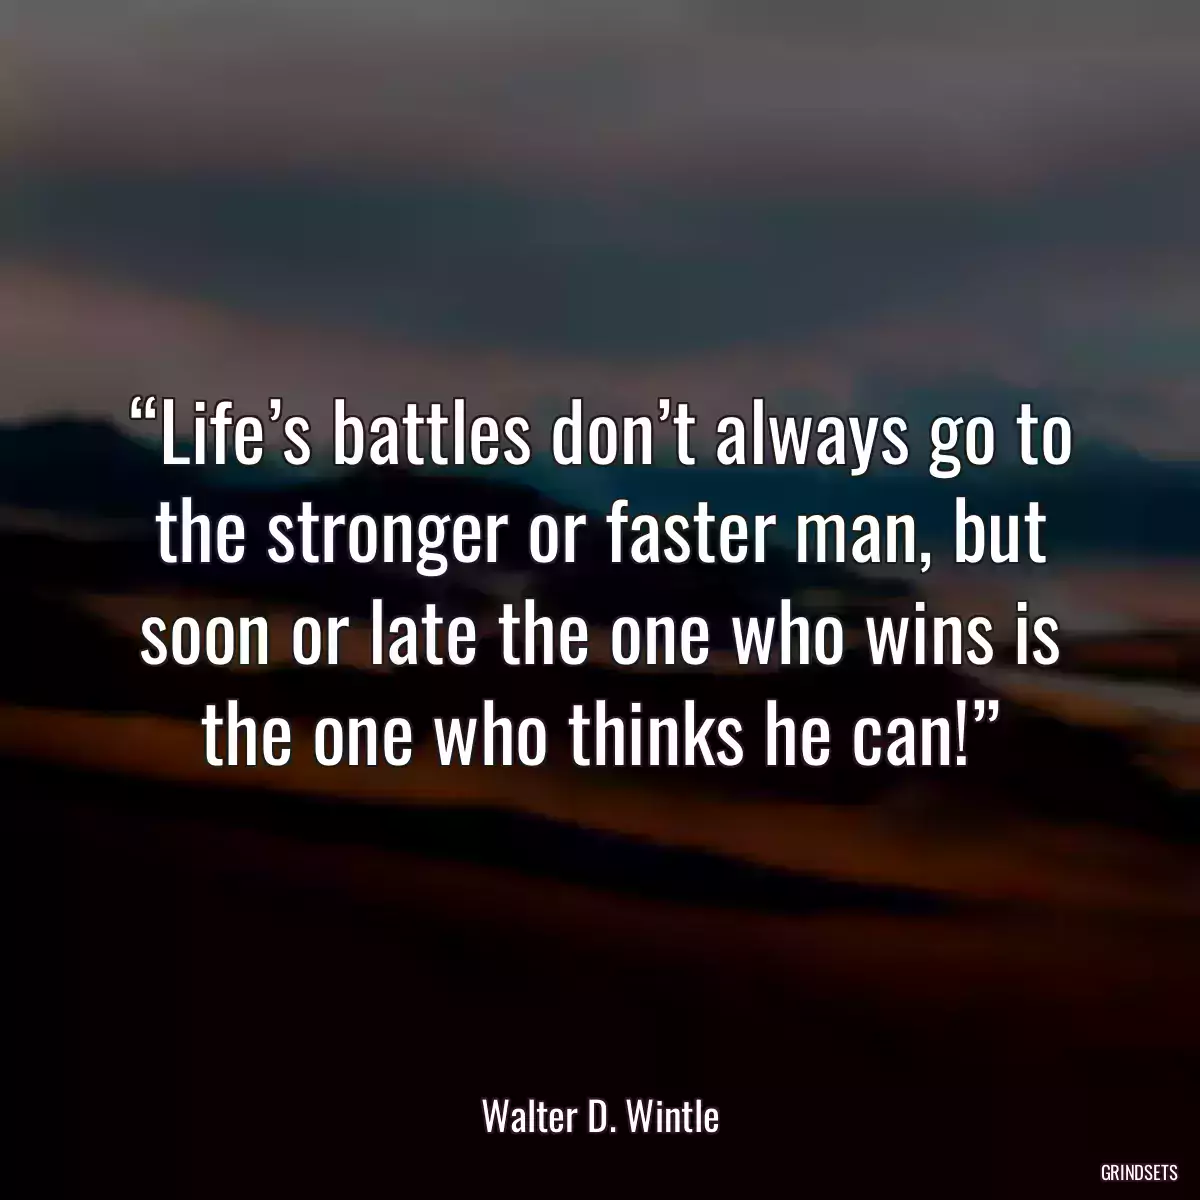 “Life’s battles don’t always go to the stronger or faster man, but soon or late the one who wins is the one who thinks he can!”